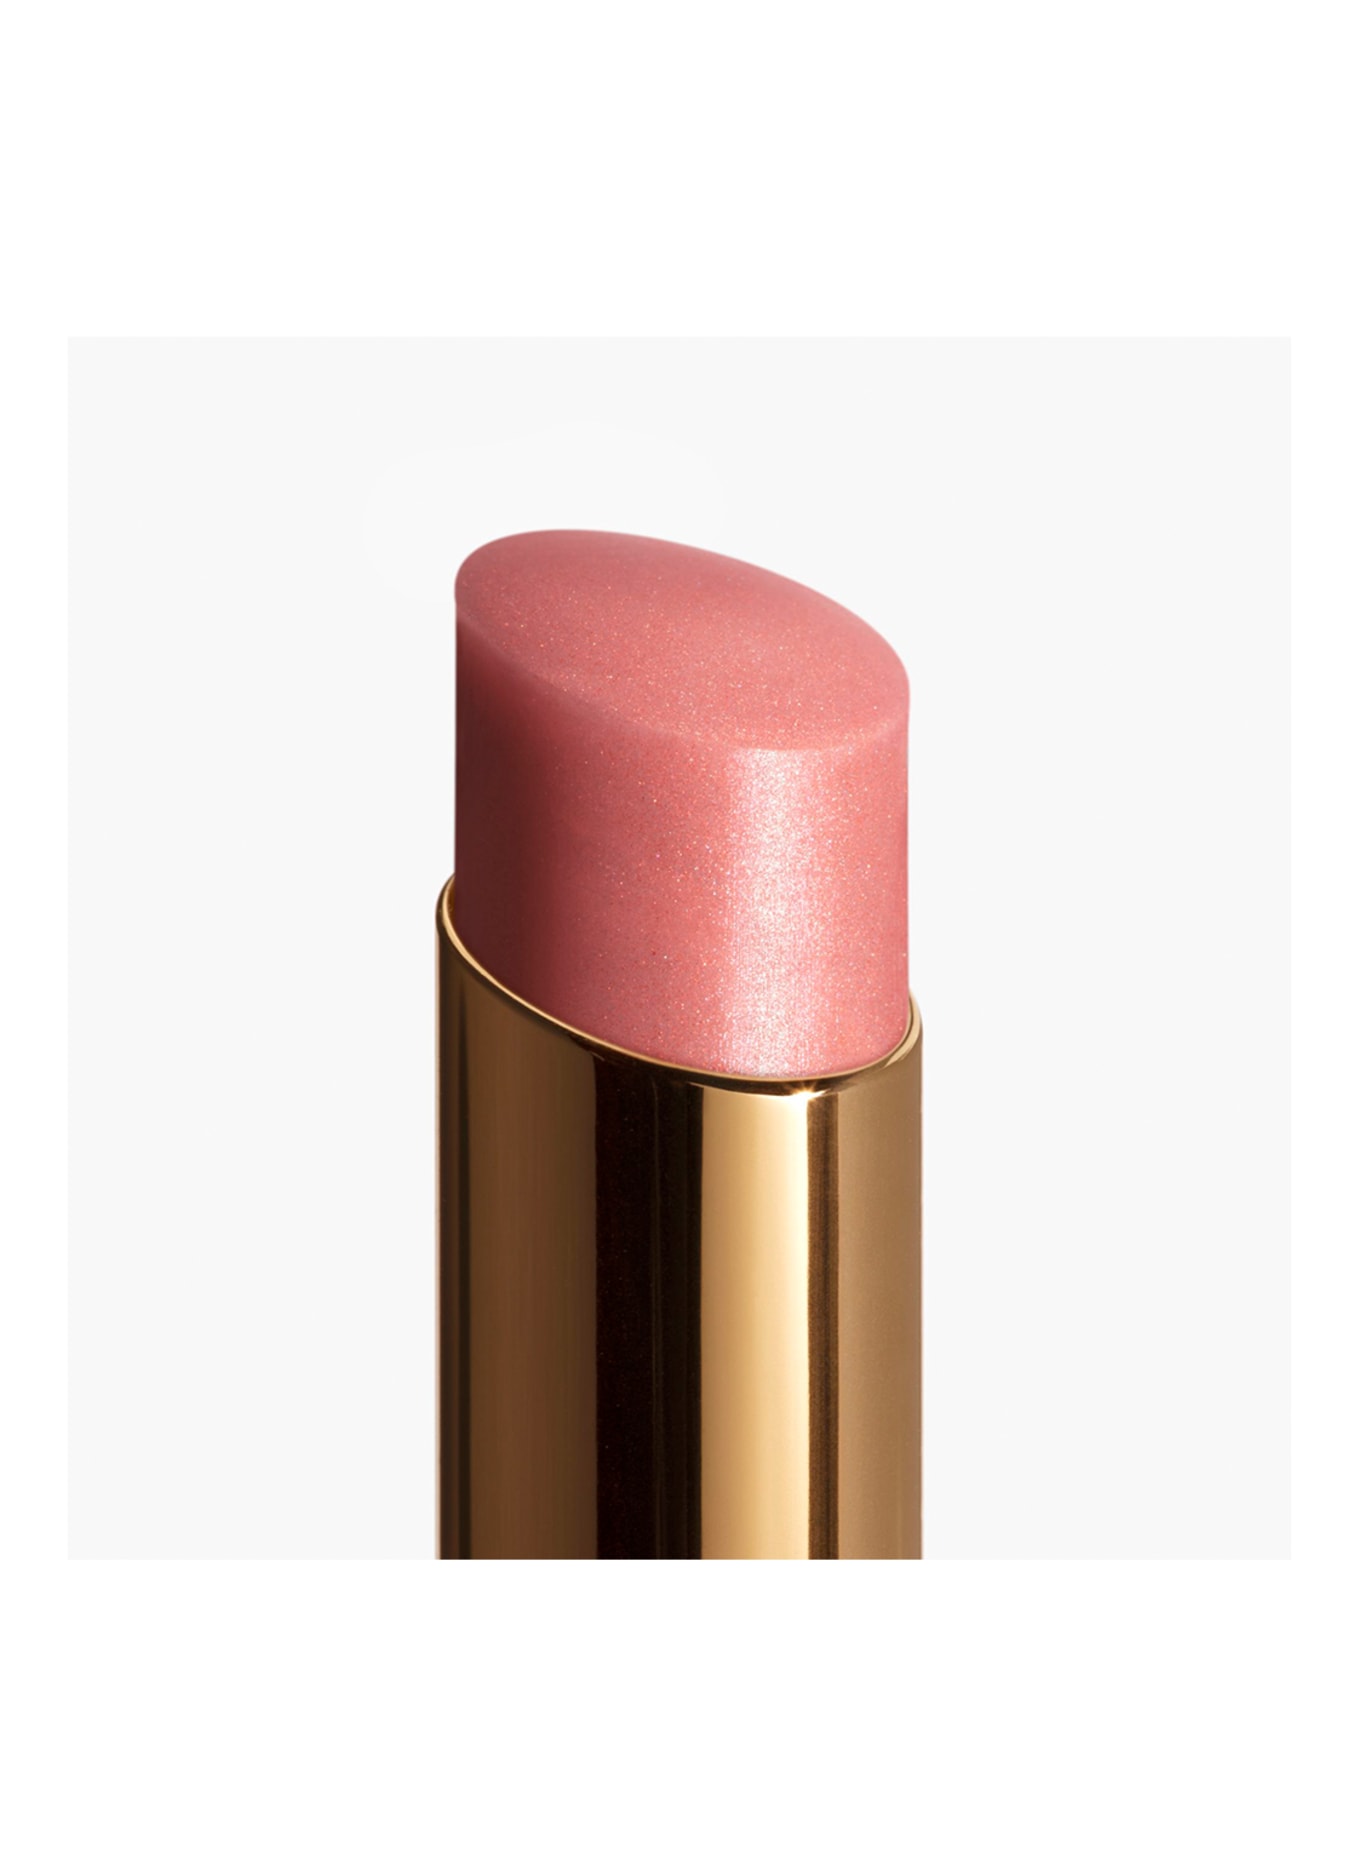 CHANEL ROUGE COCO BAUME in 928 pink delight